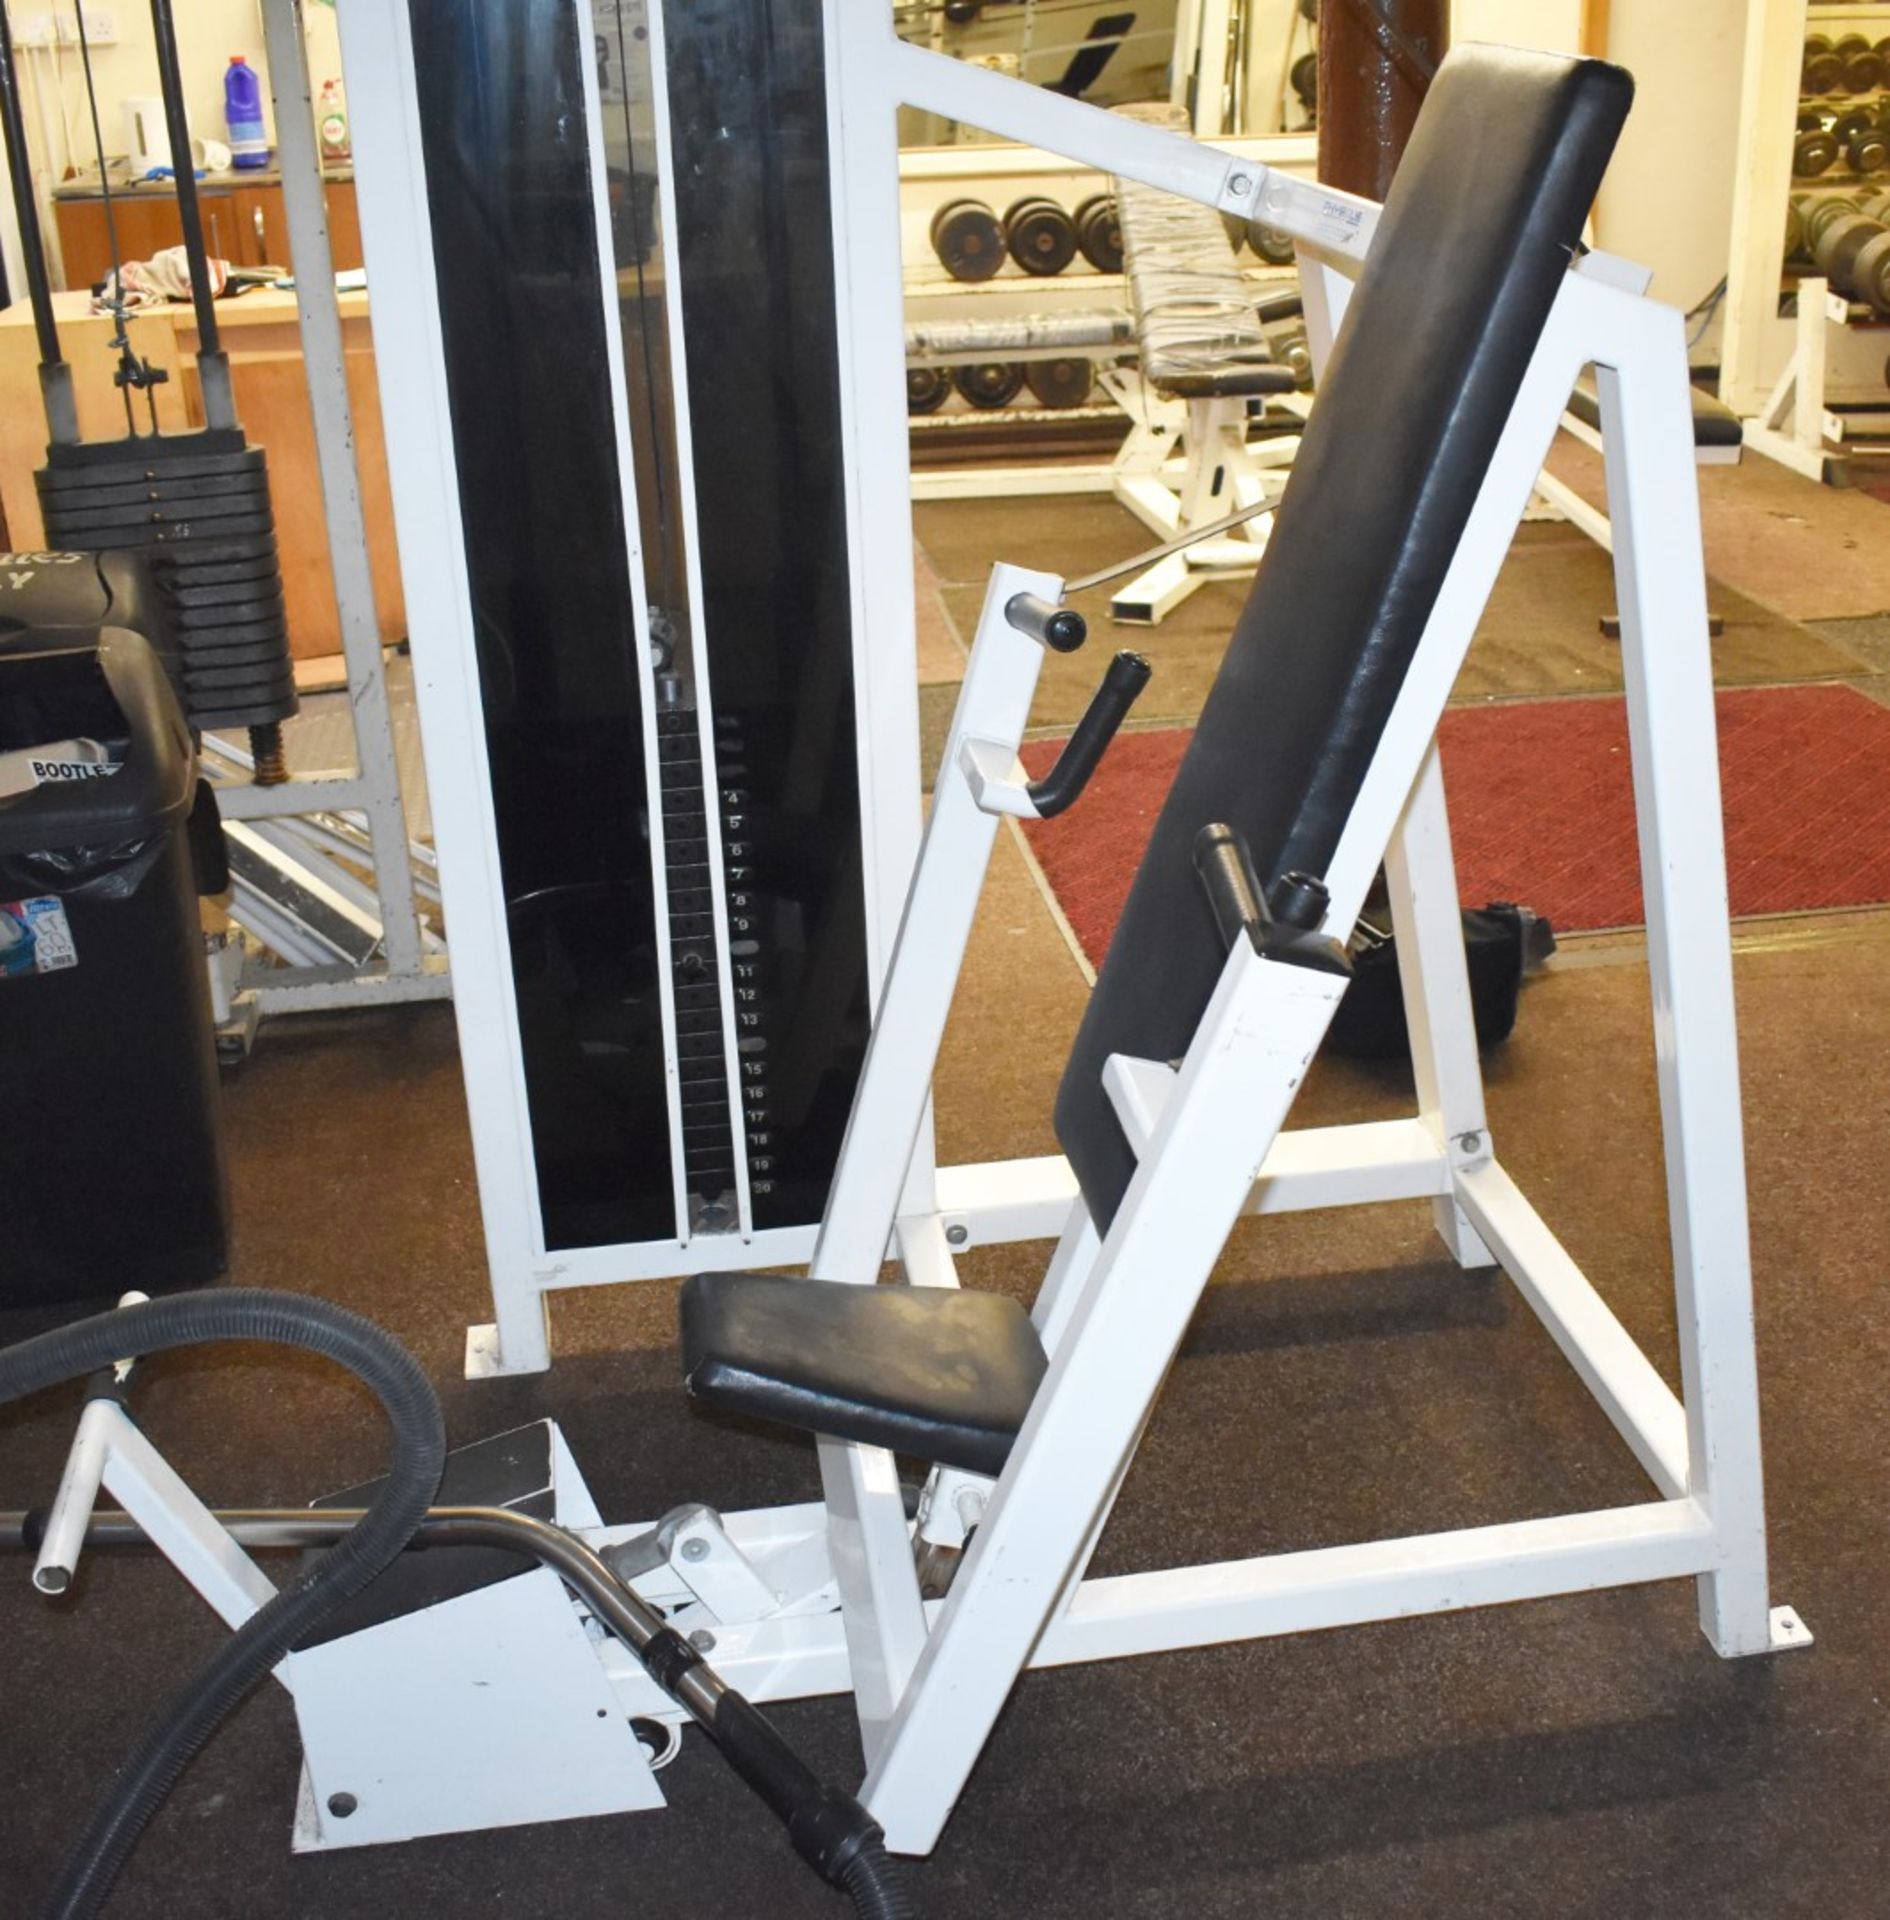 Contents of Bodybuilding and Strongman Gym - Includes Approx 30 Pieces of Gym Equipment, Floor Mats, - Image 10 of 95